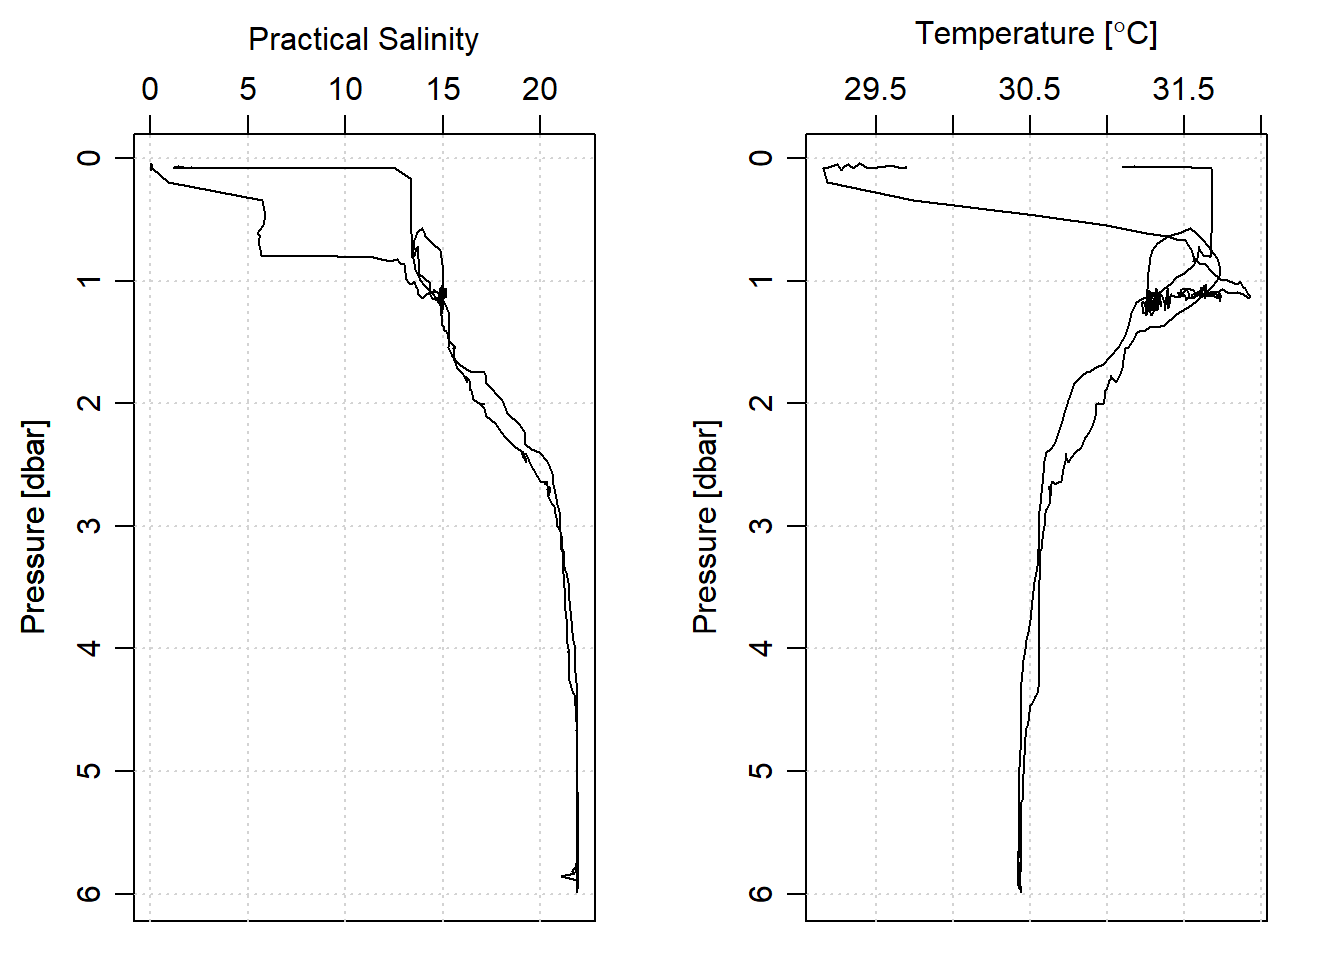 Salinity and temperature profiles showing downcast and upcast measurments